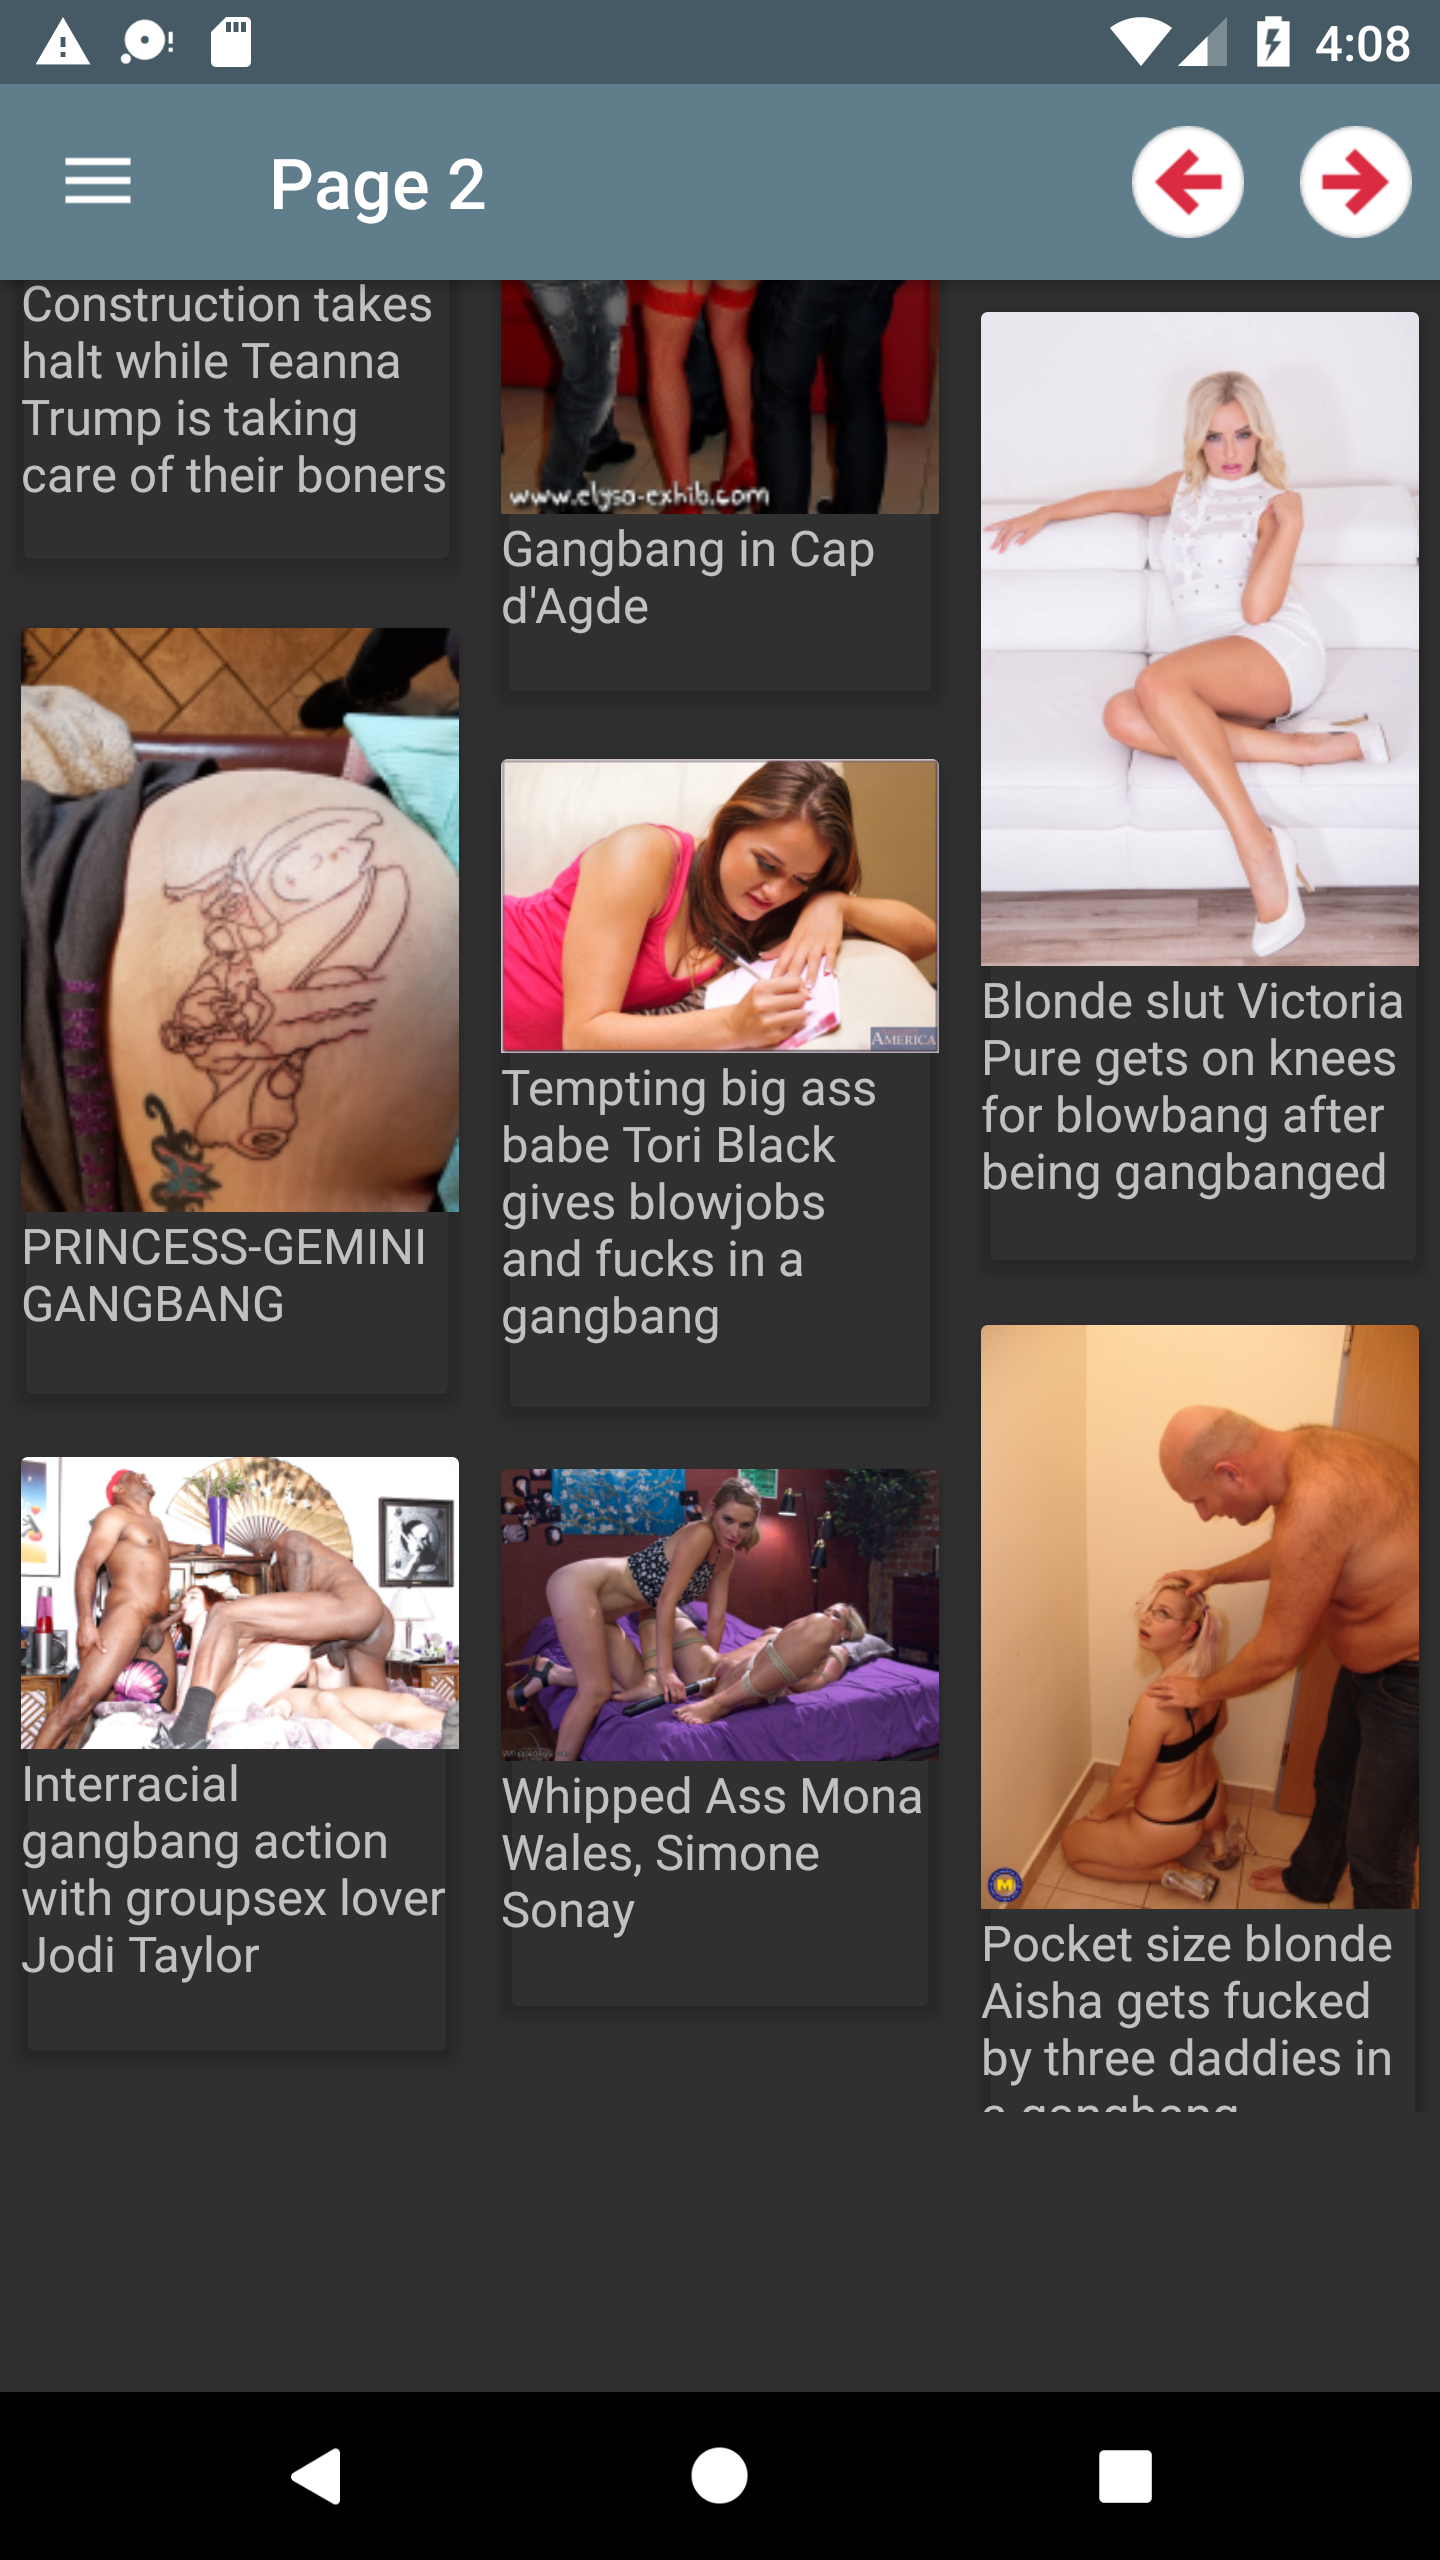 Gangbang Porn galleries,android,picture,pictures,hot,pornstars,manga,hentai,pics,sexy,porn,gallery,erotic,henti,anime,страпон,манга,apps,download,app